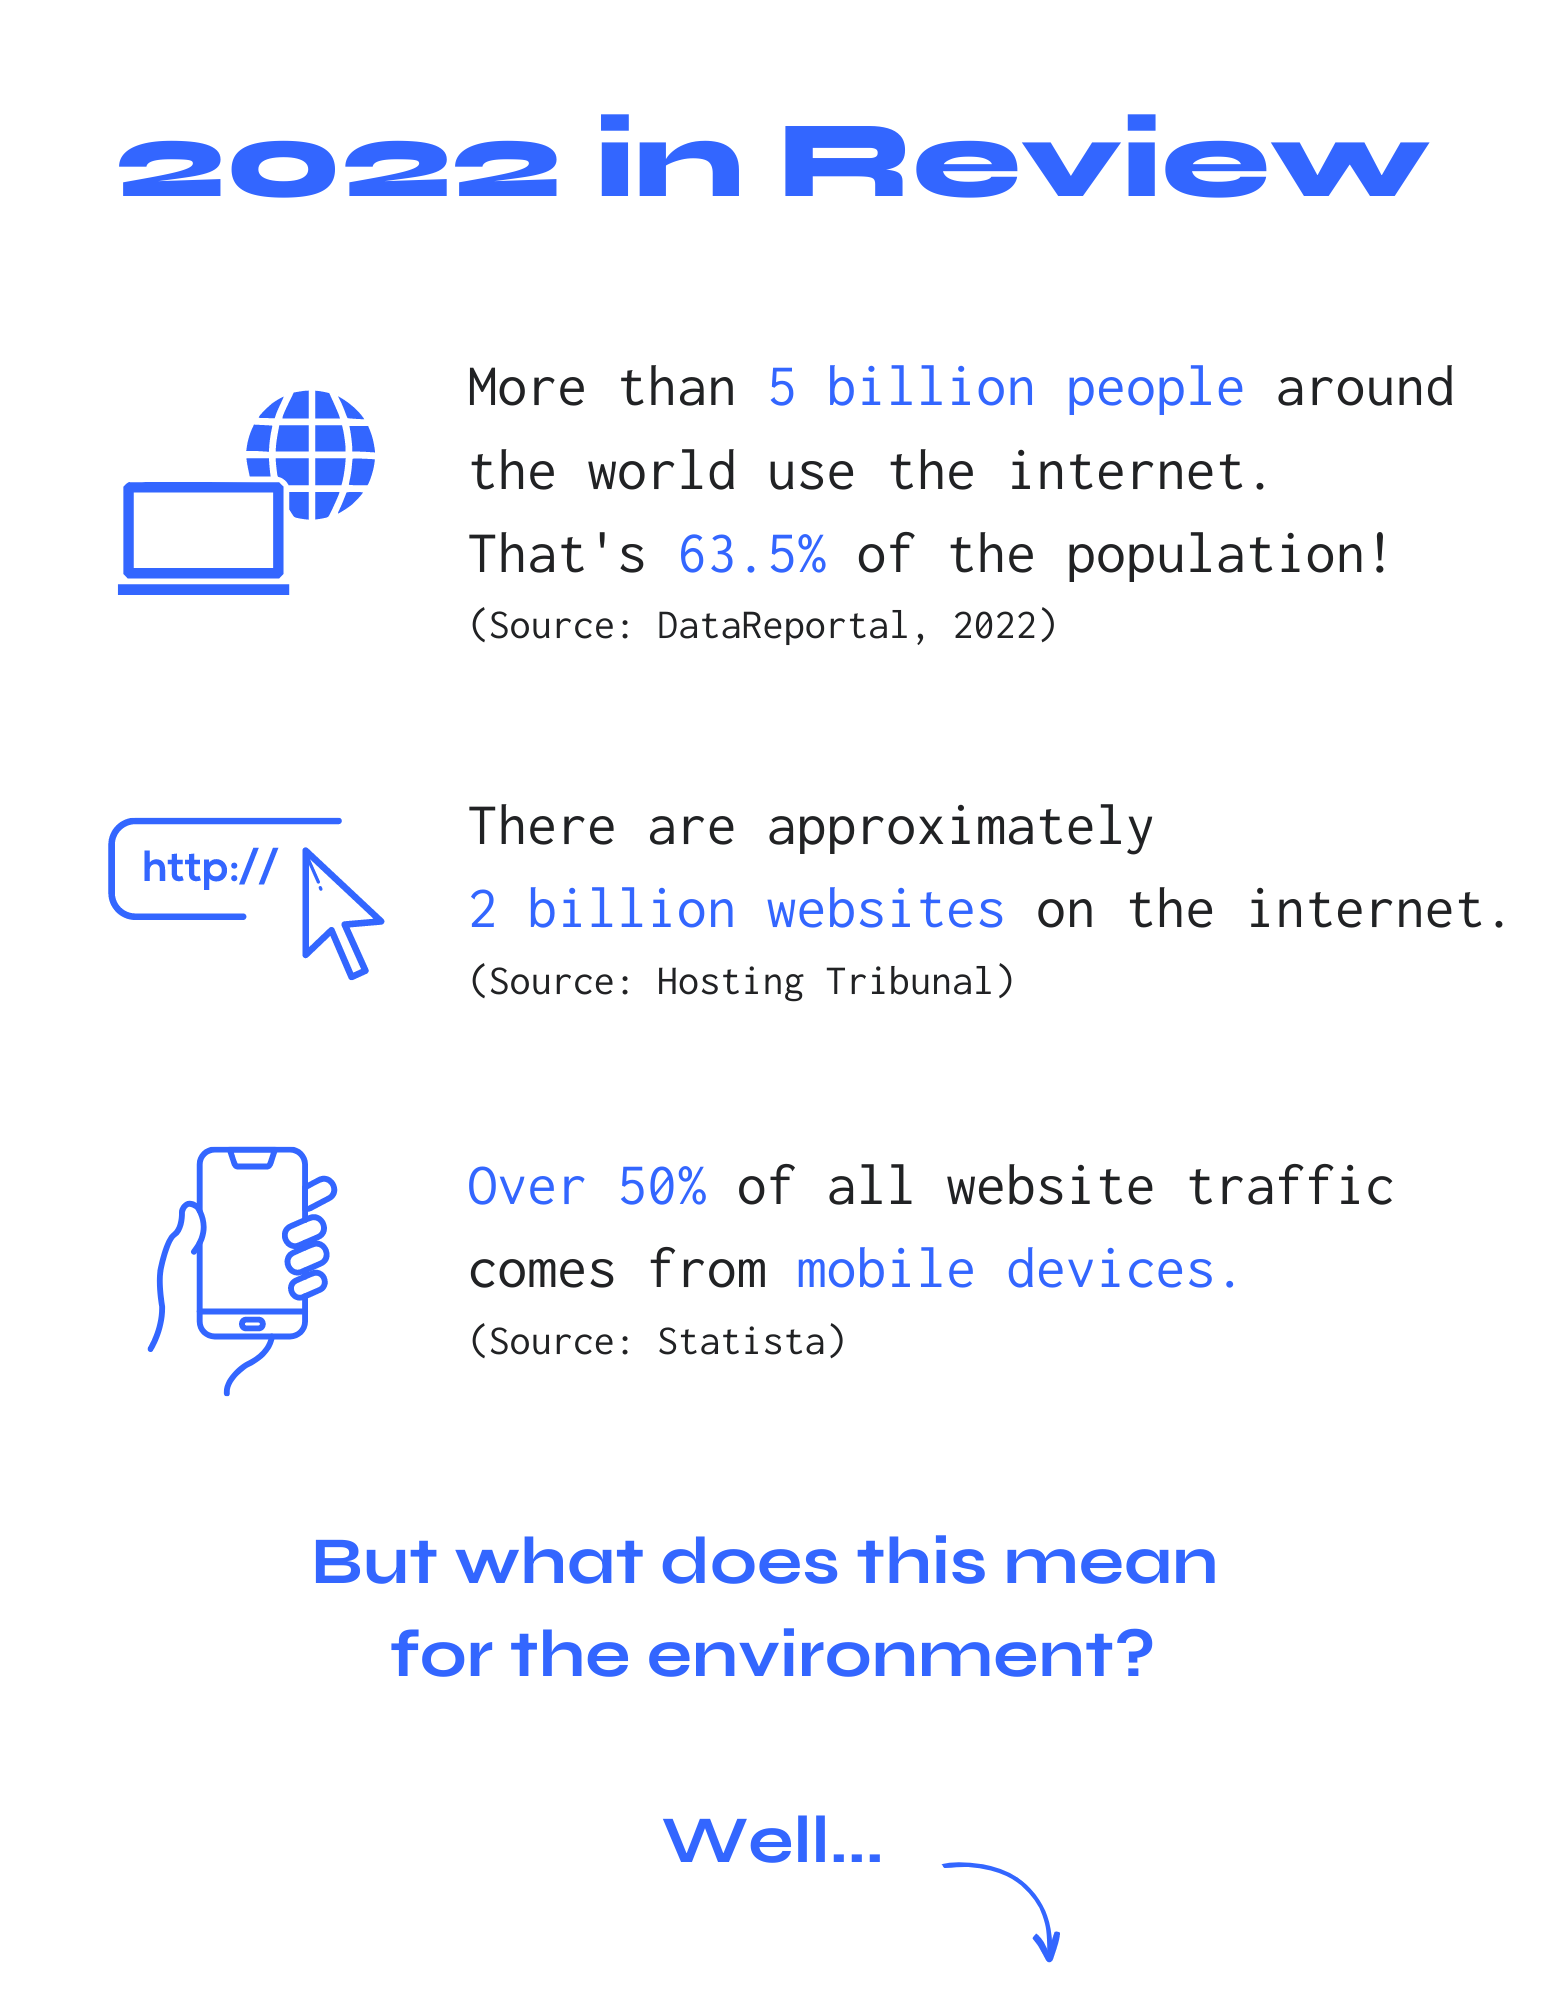 More than 5 billion people around the world use the internet. That's 63.5% of the population! (Source: DataReportal, 2022)  There are approximately  2 billion websites on the internet.  (Source: Hosting Tribunal) Over 50% of all website traffic comes from mobile devices.  (Source: Statista) But what does this mean  for the environment?  Well...